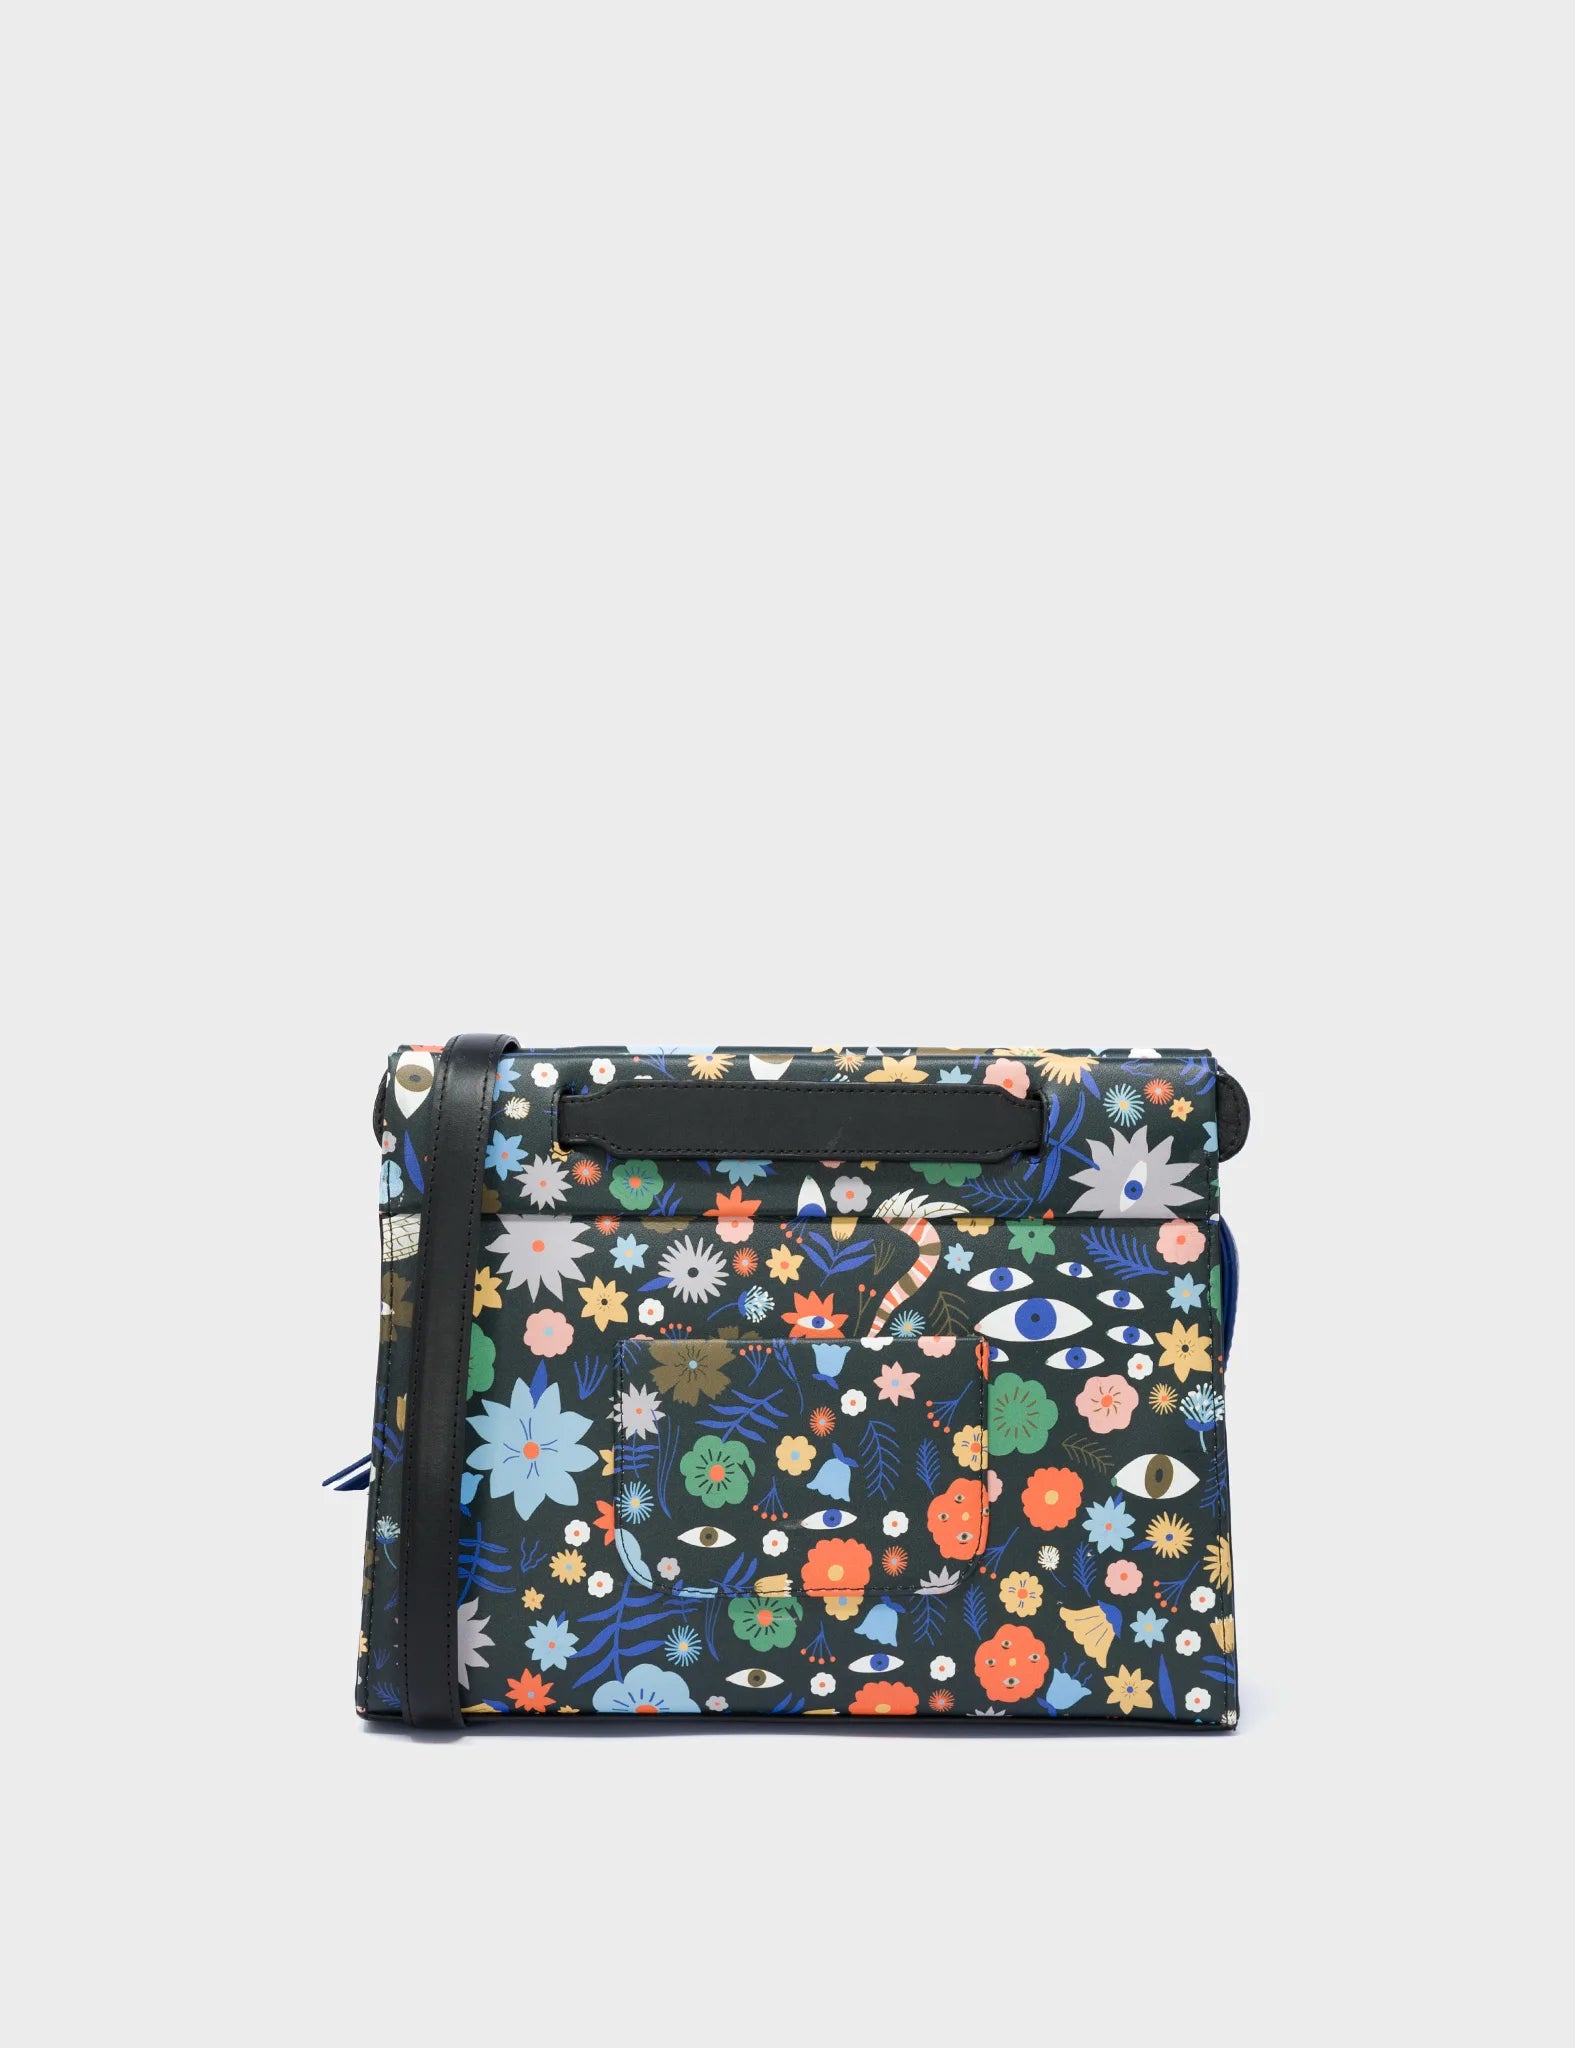 Crossbody Small Black Leather Bag - Floral Pattern Print - Back 